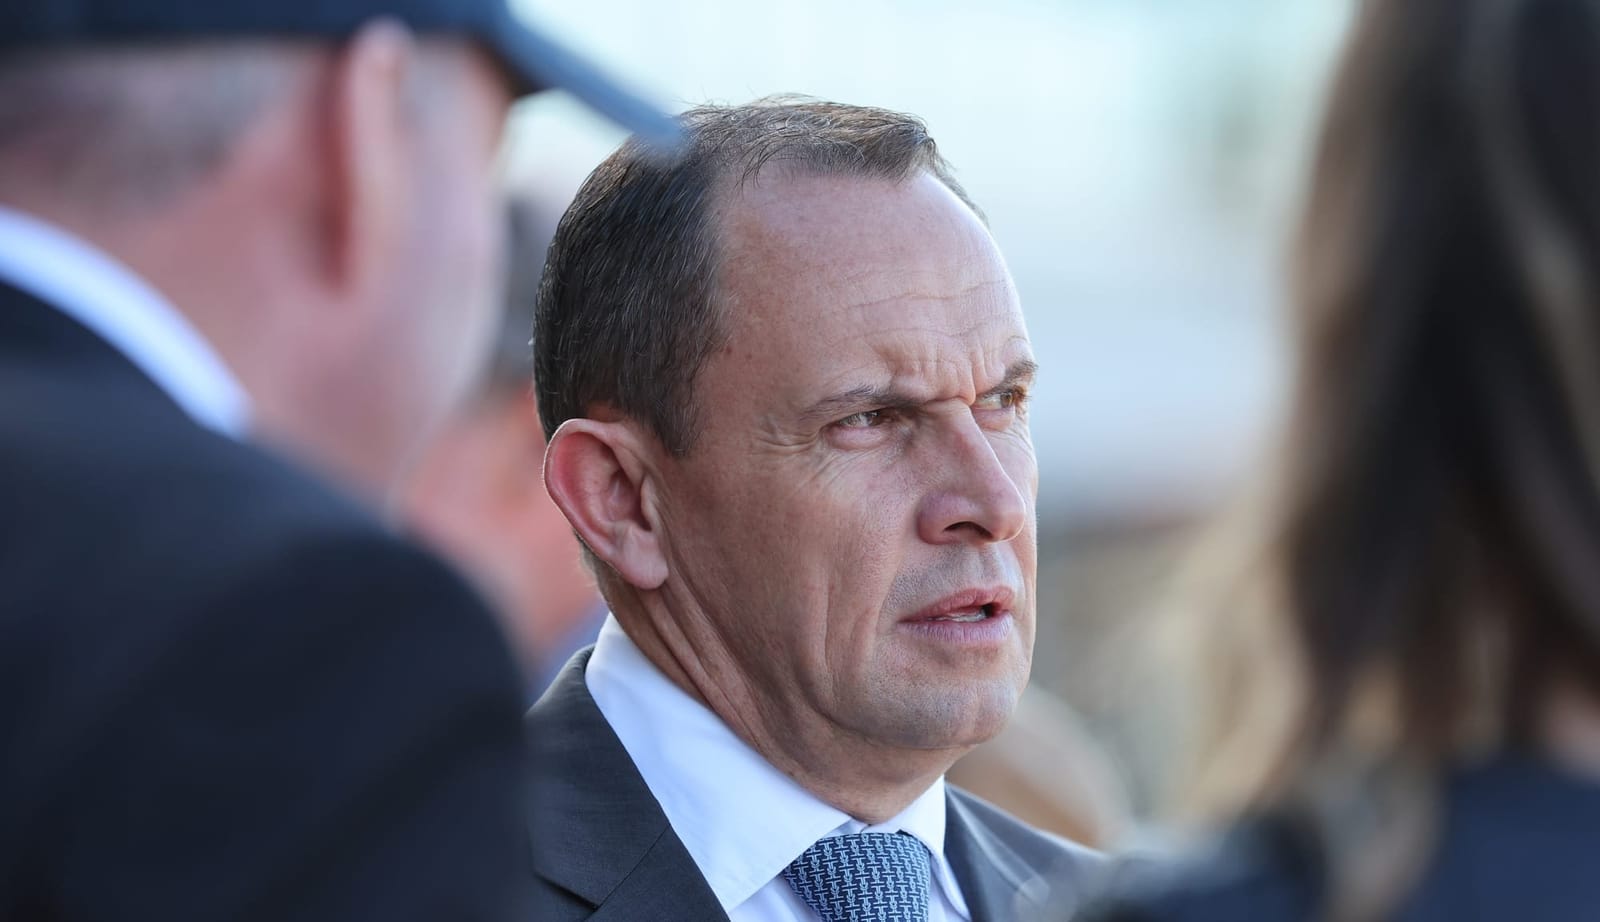 'Give yourself an uppercut' – Chris Waller emphatically steps up against Rosehill closure